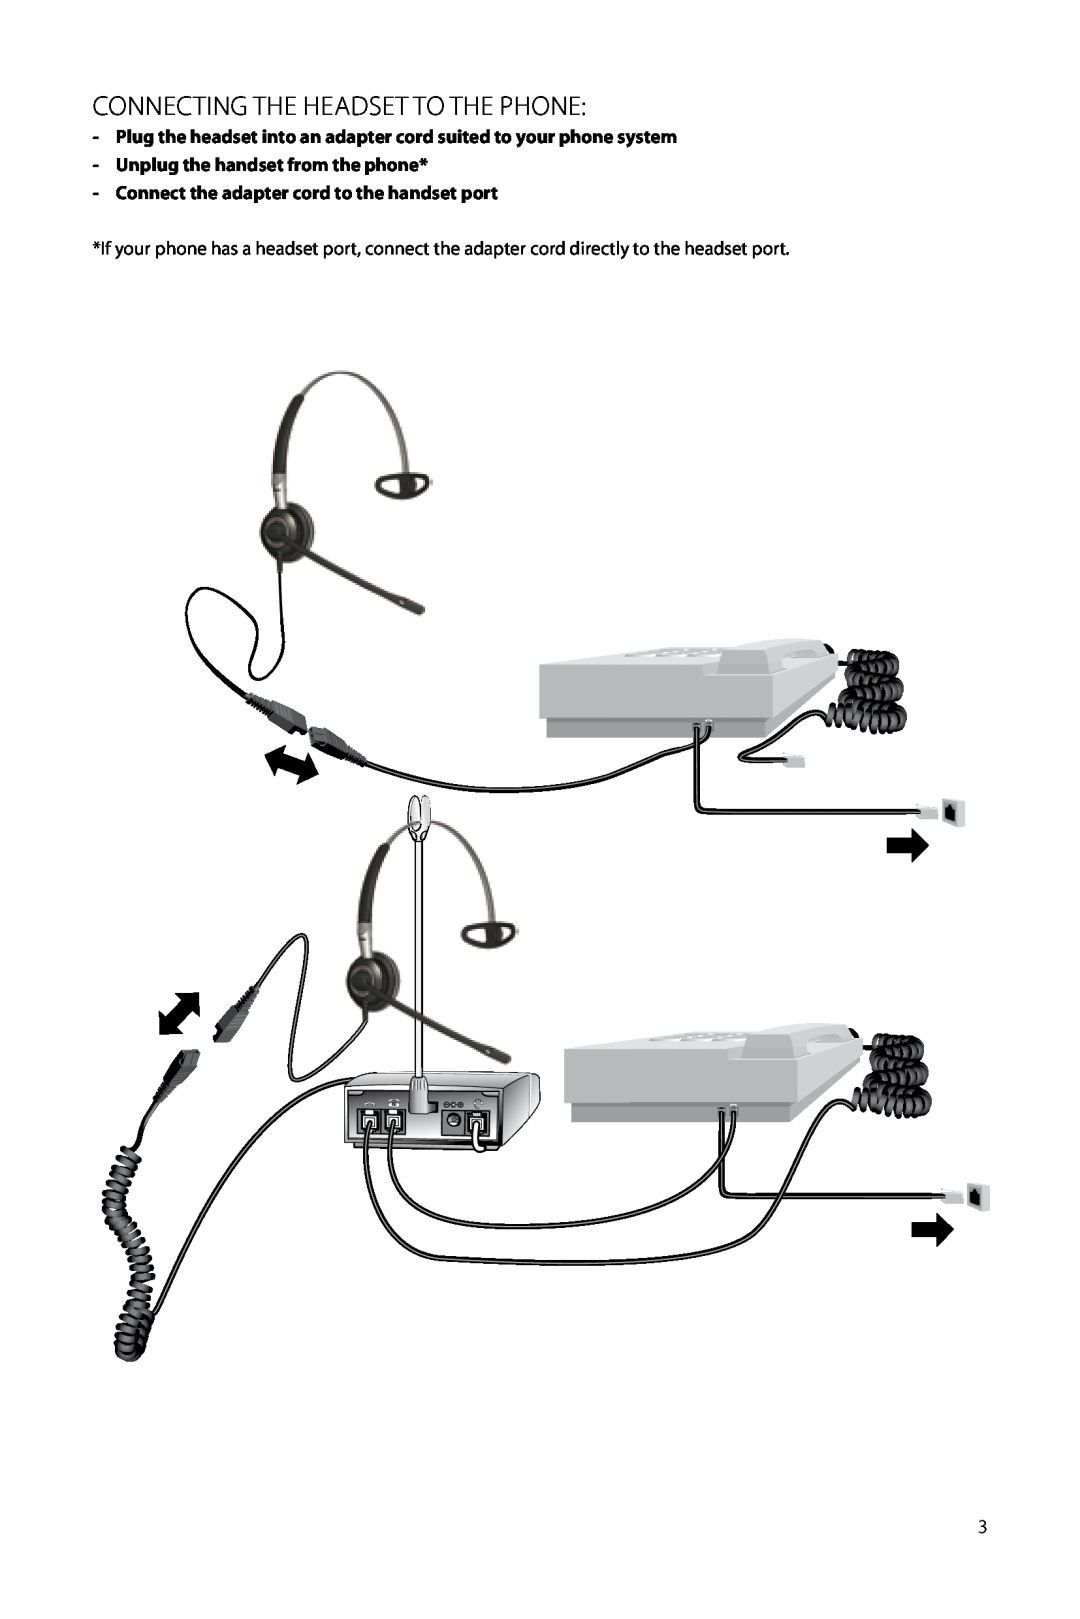 Jabra 2400 user manual connecting the headset to the phone, Unplug the handset from the phone 